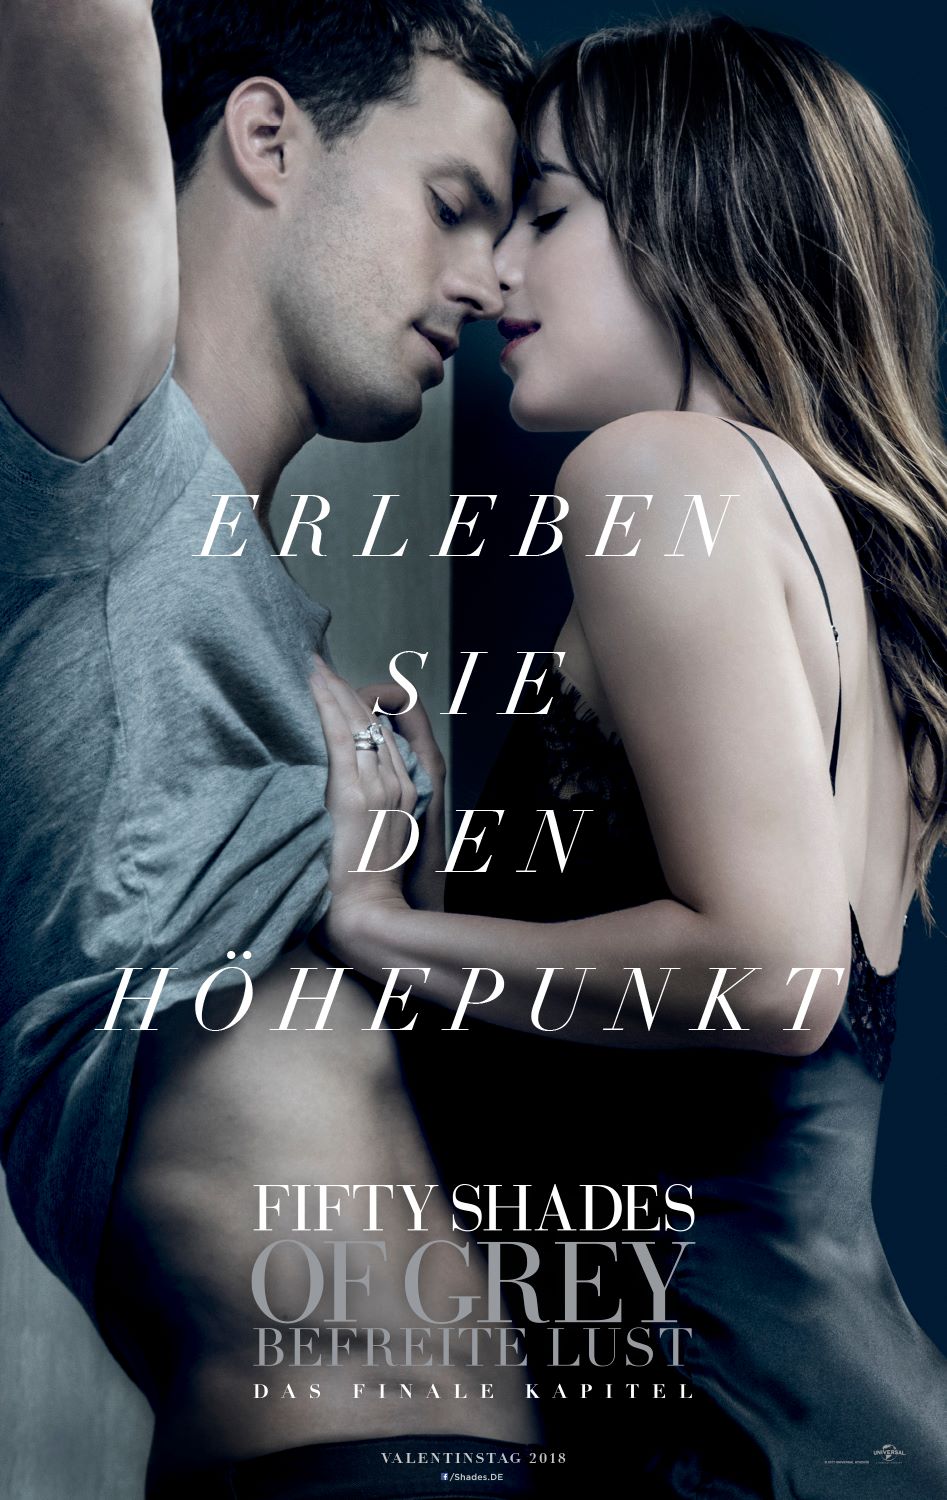 alison catalano recommends 50 shades movie online pic